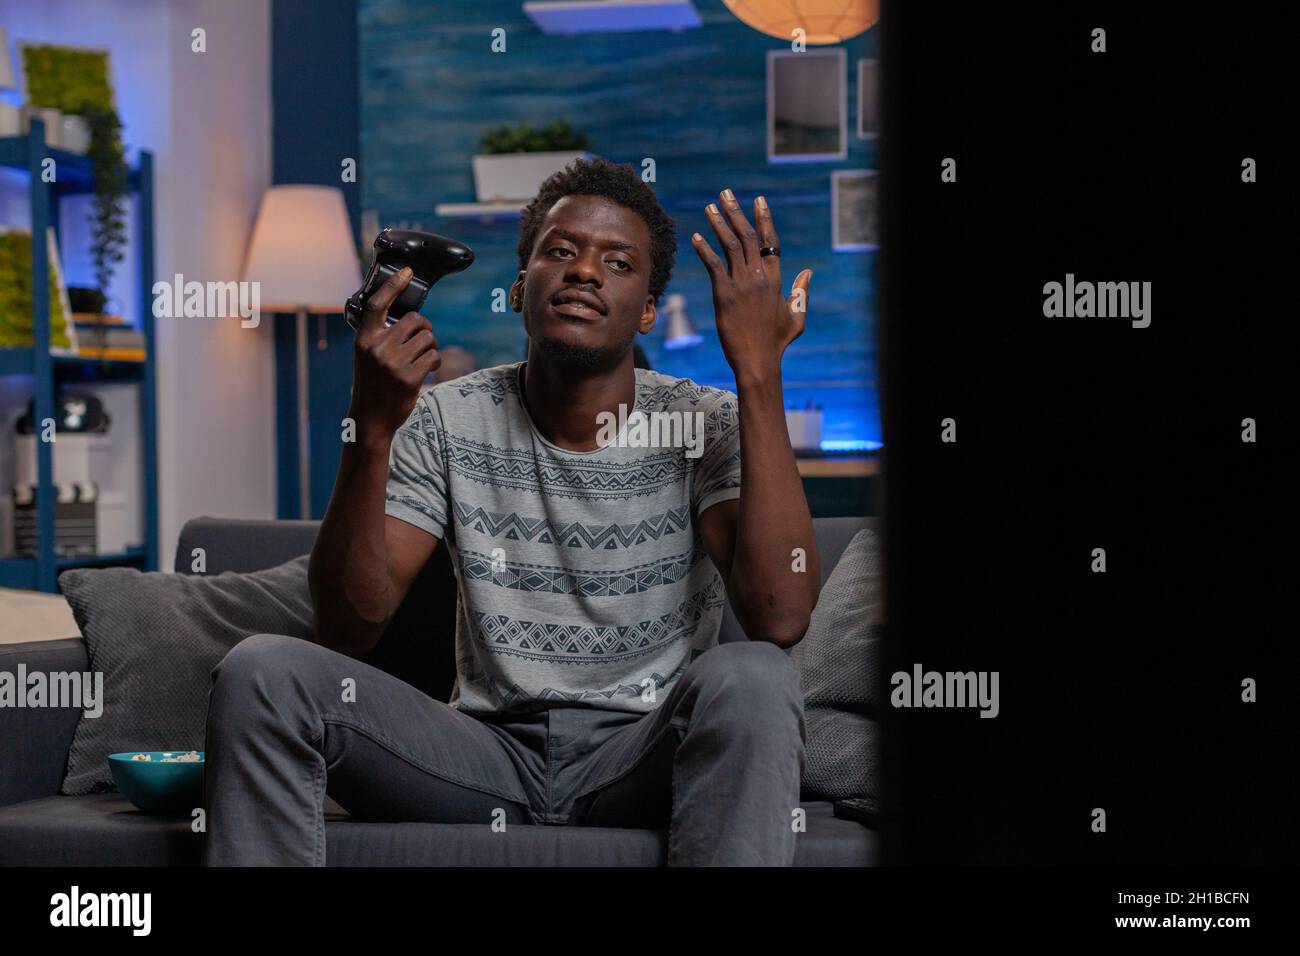 African american player losing online videogames during virtual gaming competition sitting on couch in living room. Black gamer guy playing games using joystick enjoying free time Stock Photo